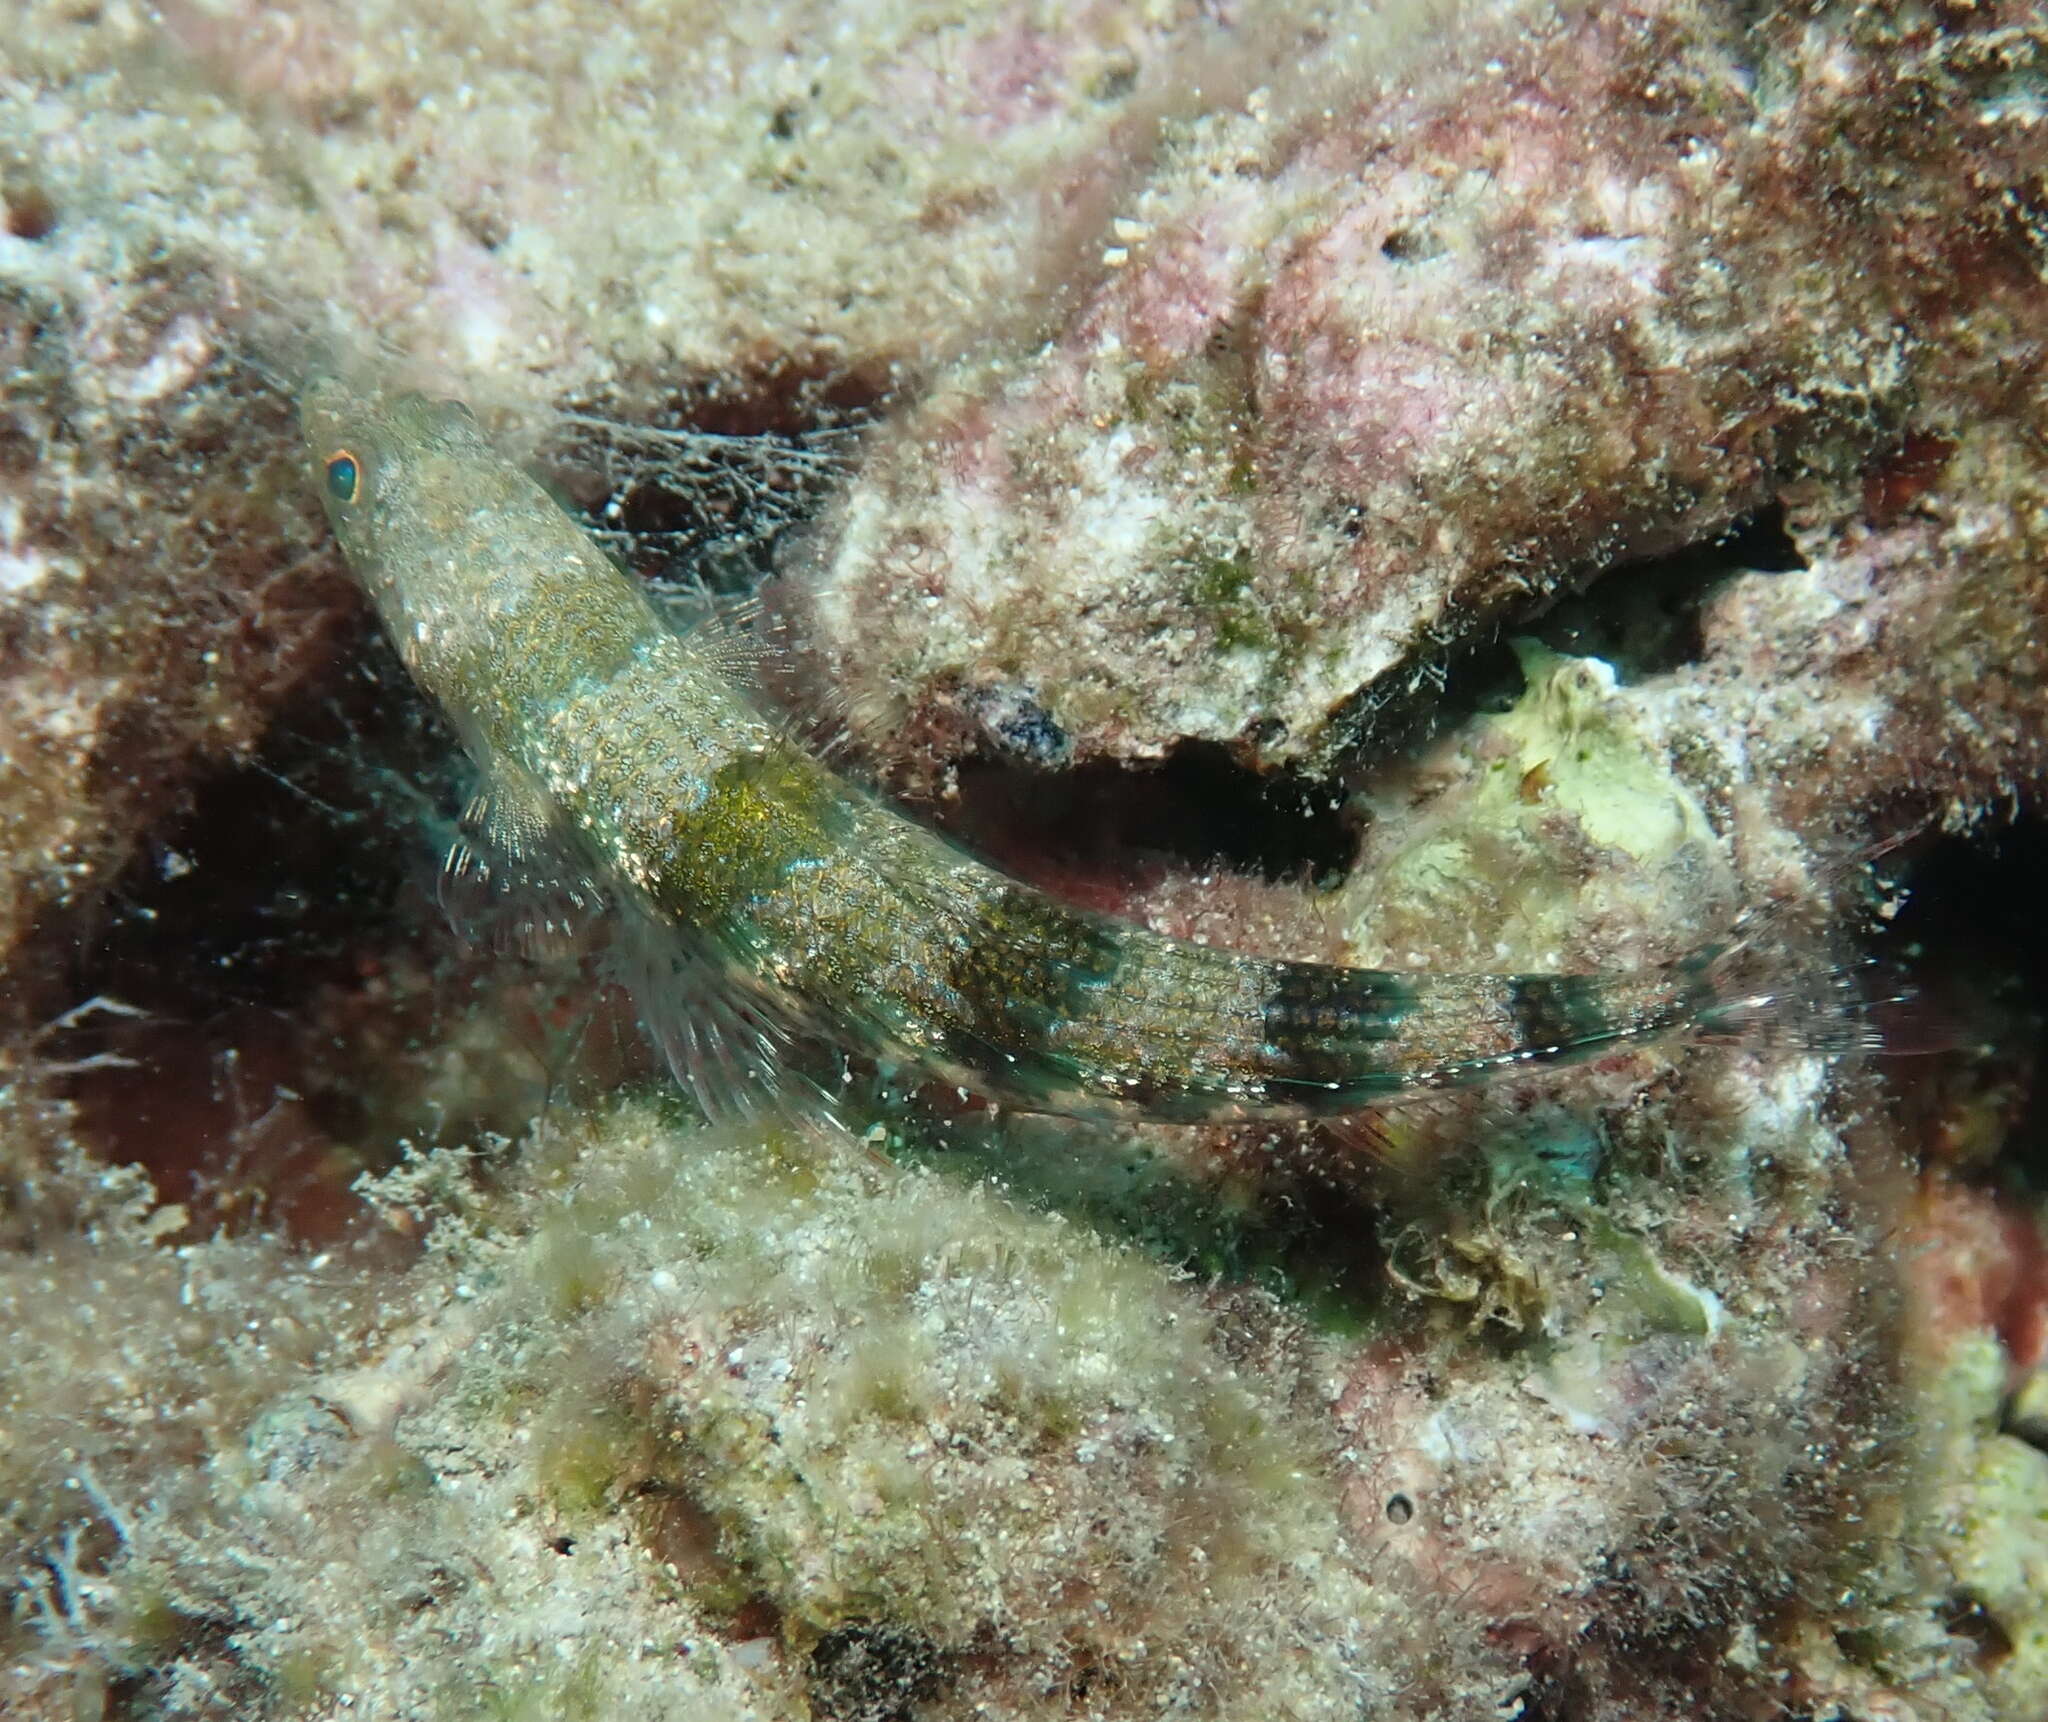 Image of Two-spot lizard fish